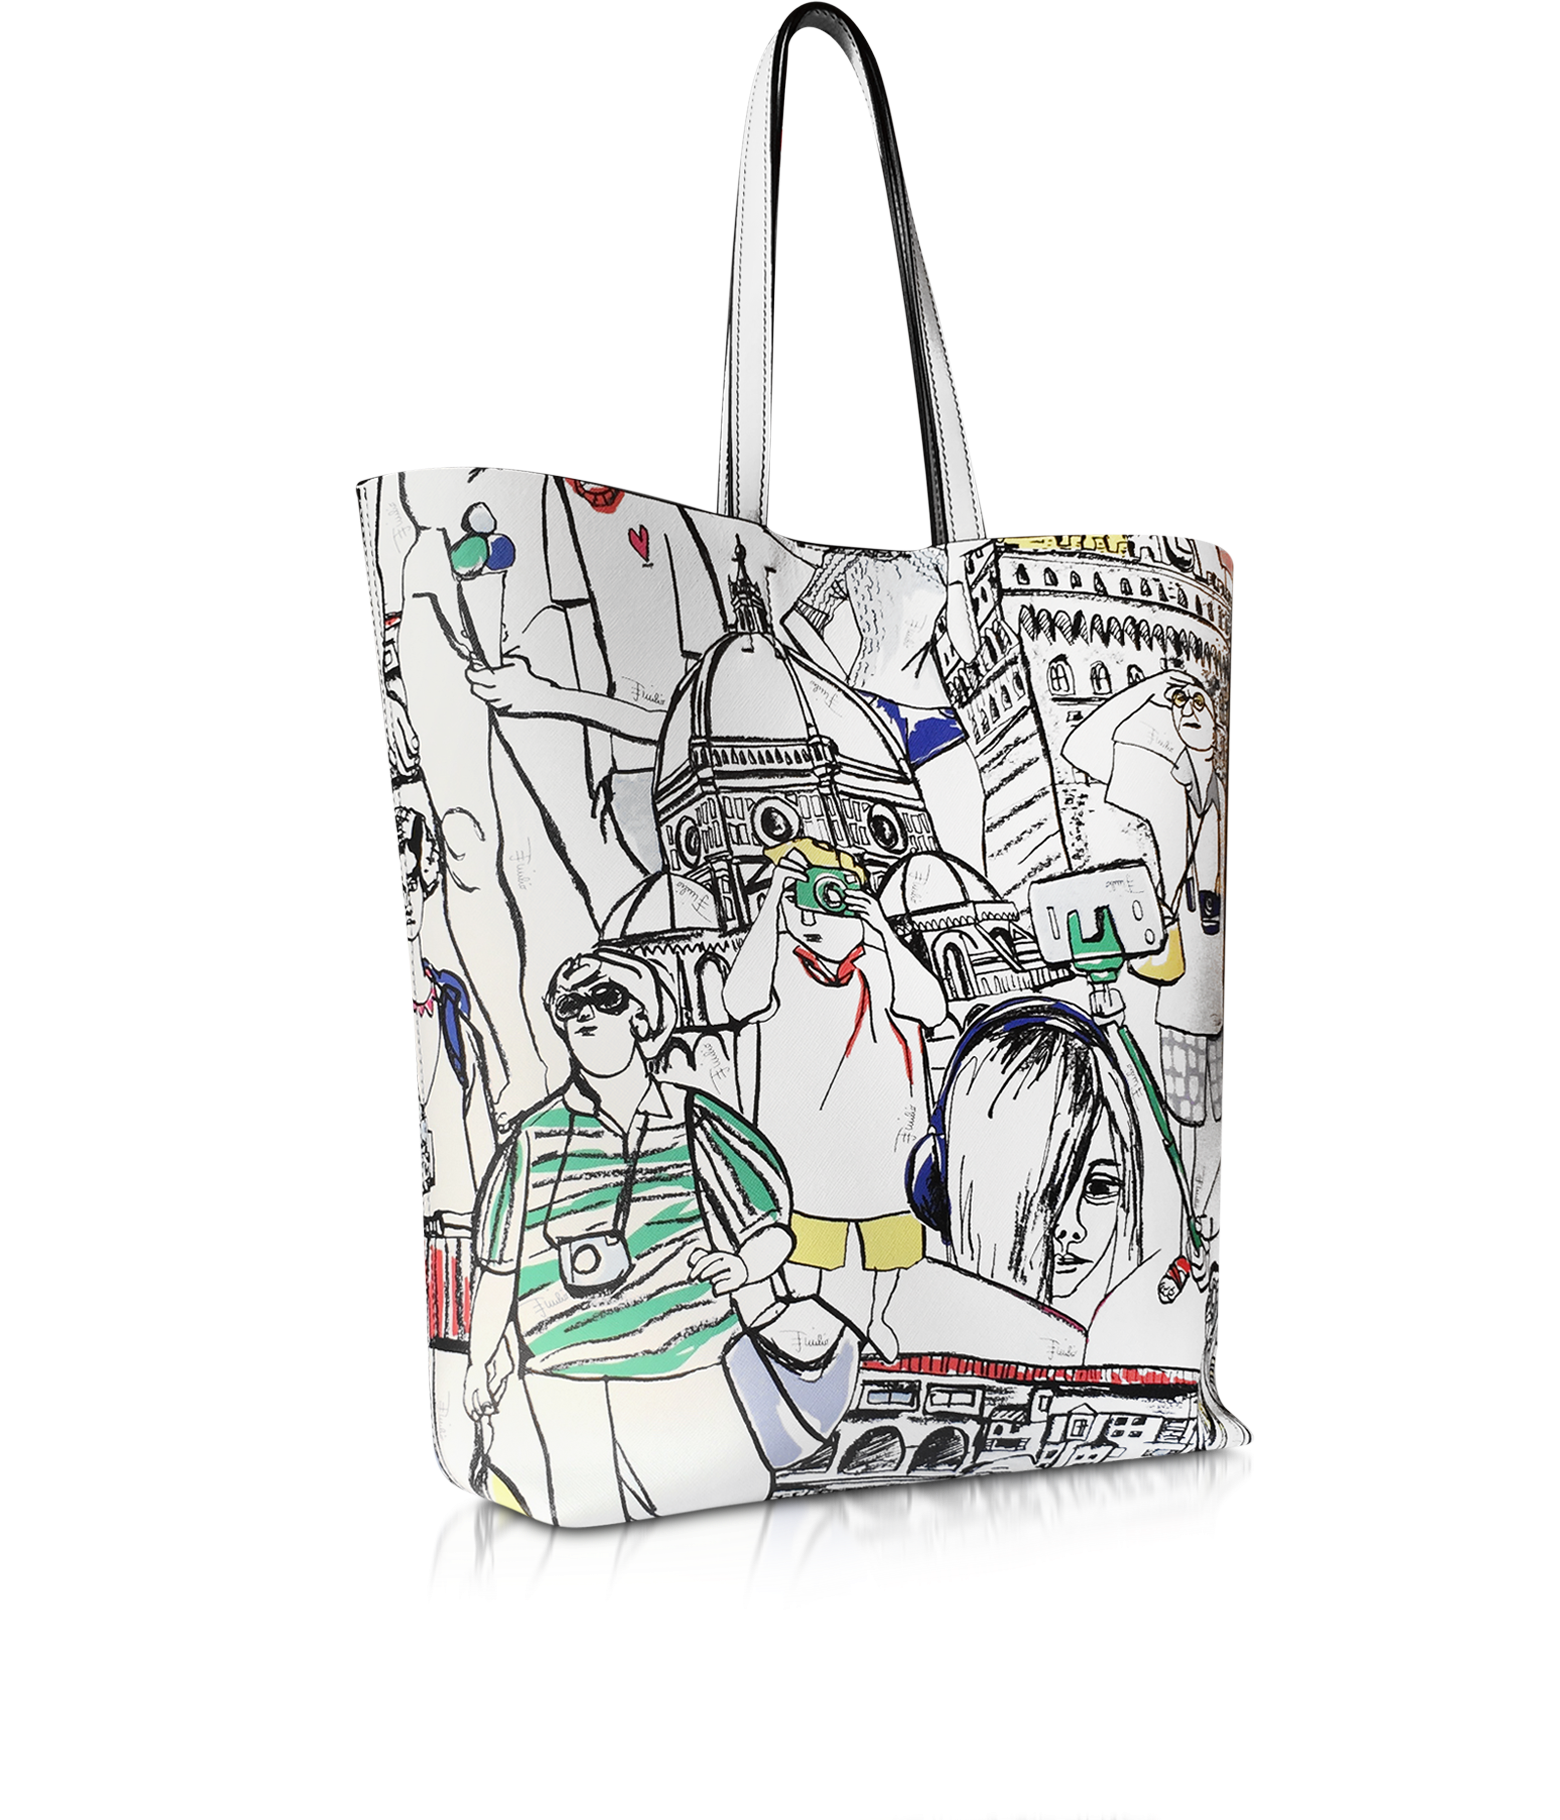 Emilio Pucci Florence Printed Leather Tote Bag at FORZIERI